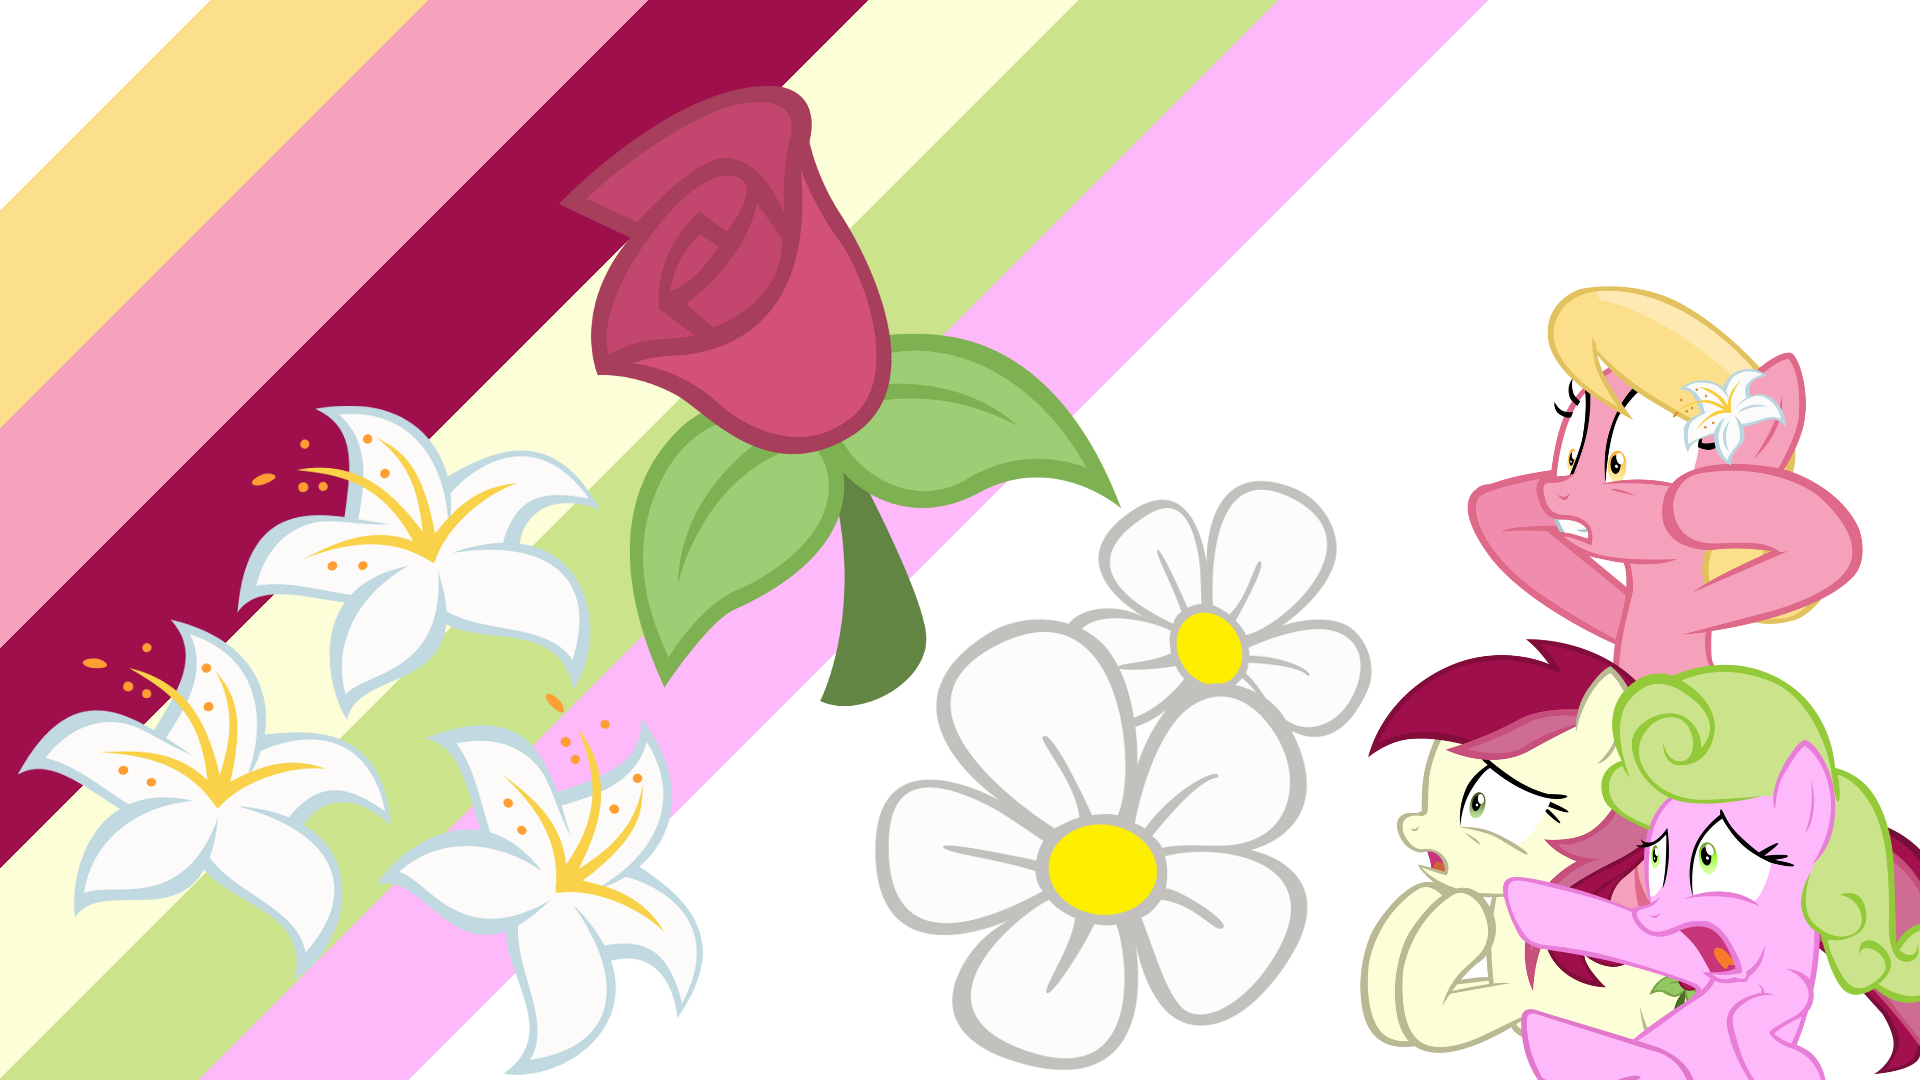 Minimalist Wallpaper 36: Flower Mares by CptOfTheFriendship, MaximillianVeers, Softfang, Takua770 and The-Smiling-Pony